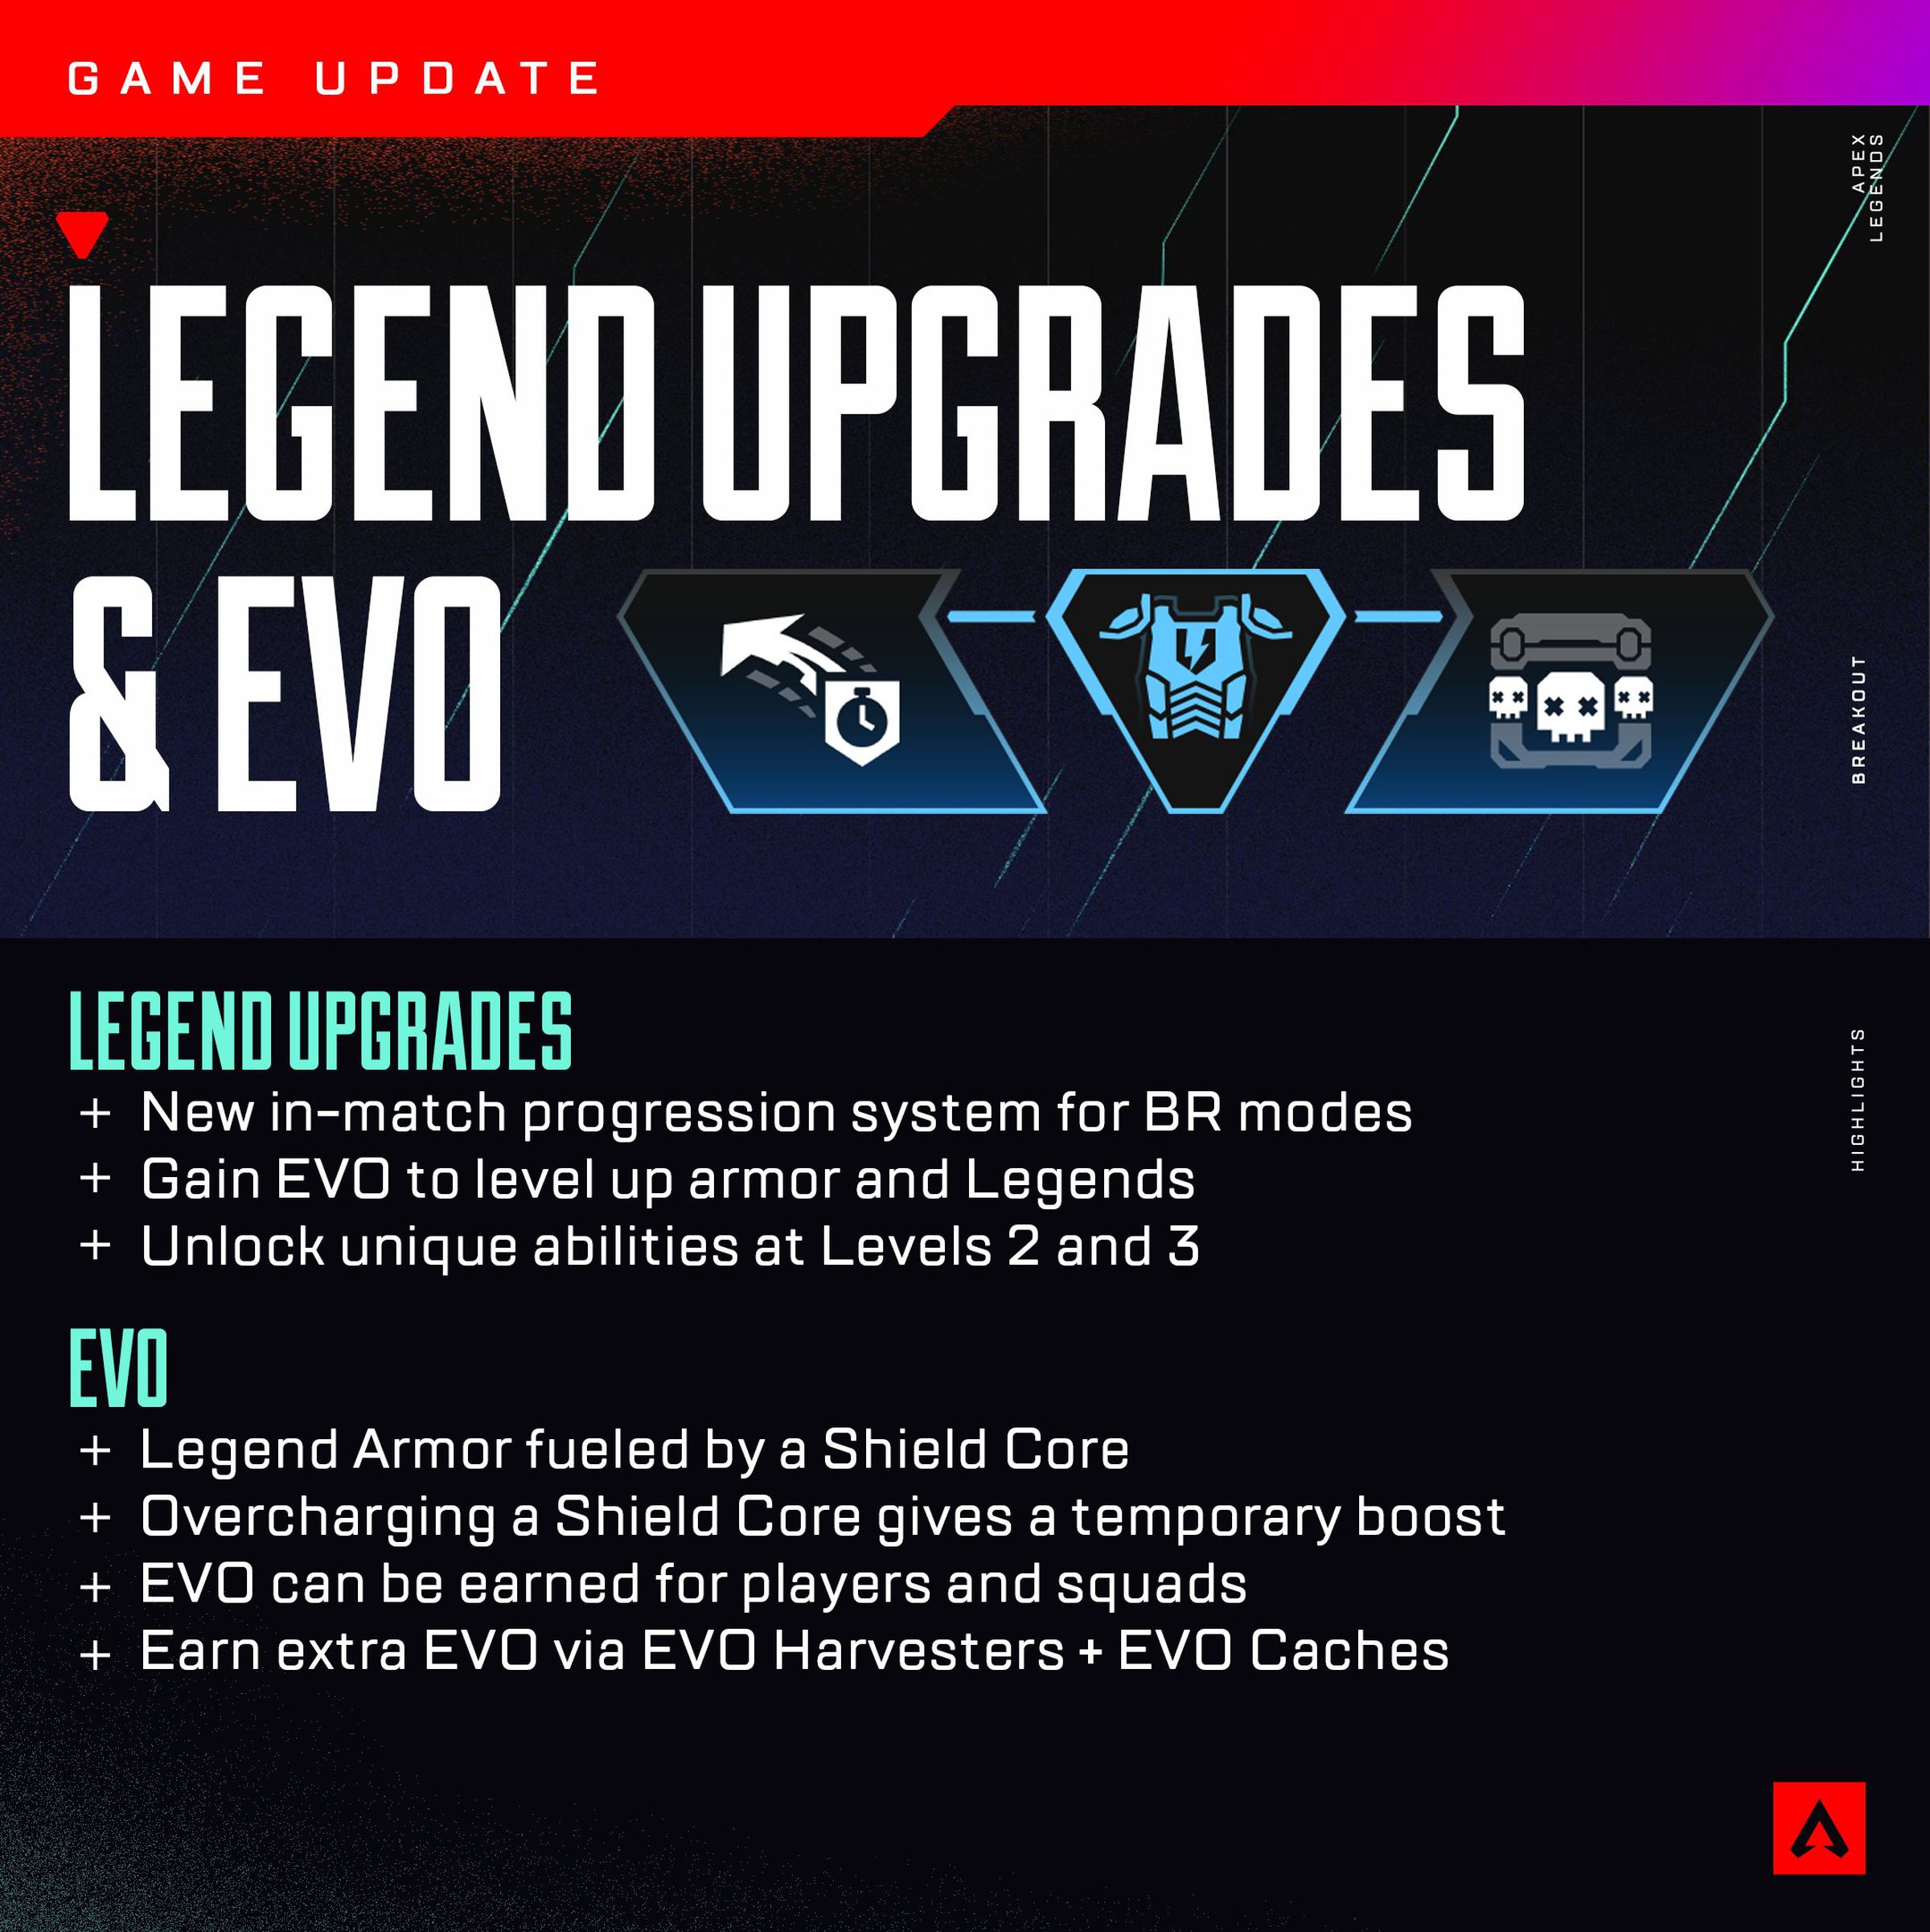 GAME UPDATE LEGEND UPGRADES &amp; EVO  LEGEND UPGRADES New in-match progression system for BR modes Gain EVO to level up armor and Legends Unlock unique abilities at Levels 2 and 3 EVO Legend Armor fueled by a Shield Core Overcharging a Shield Core gives a temporary boost EVO can be earned for players and squads Earn extra EVO via EVO Harvesters + EVO Caches